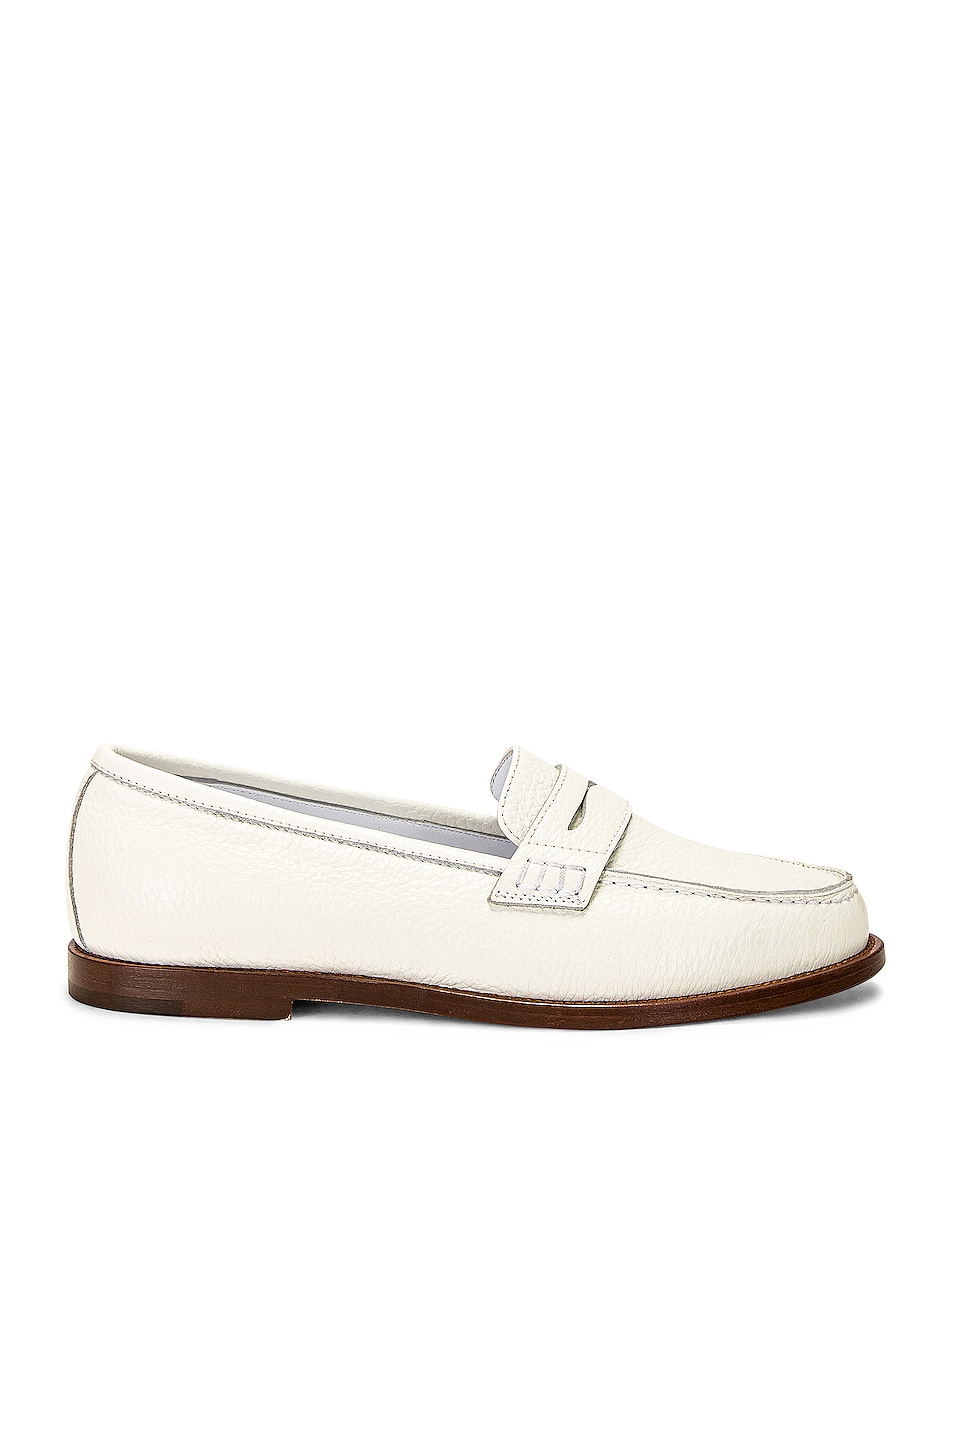 Image 1 of Manolo Blahnik Perrita Leather Loafer in White